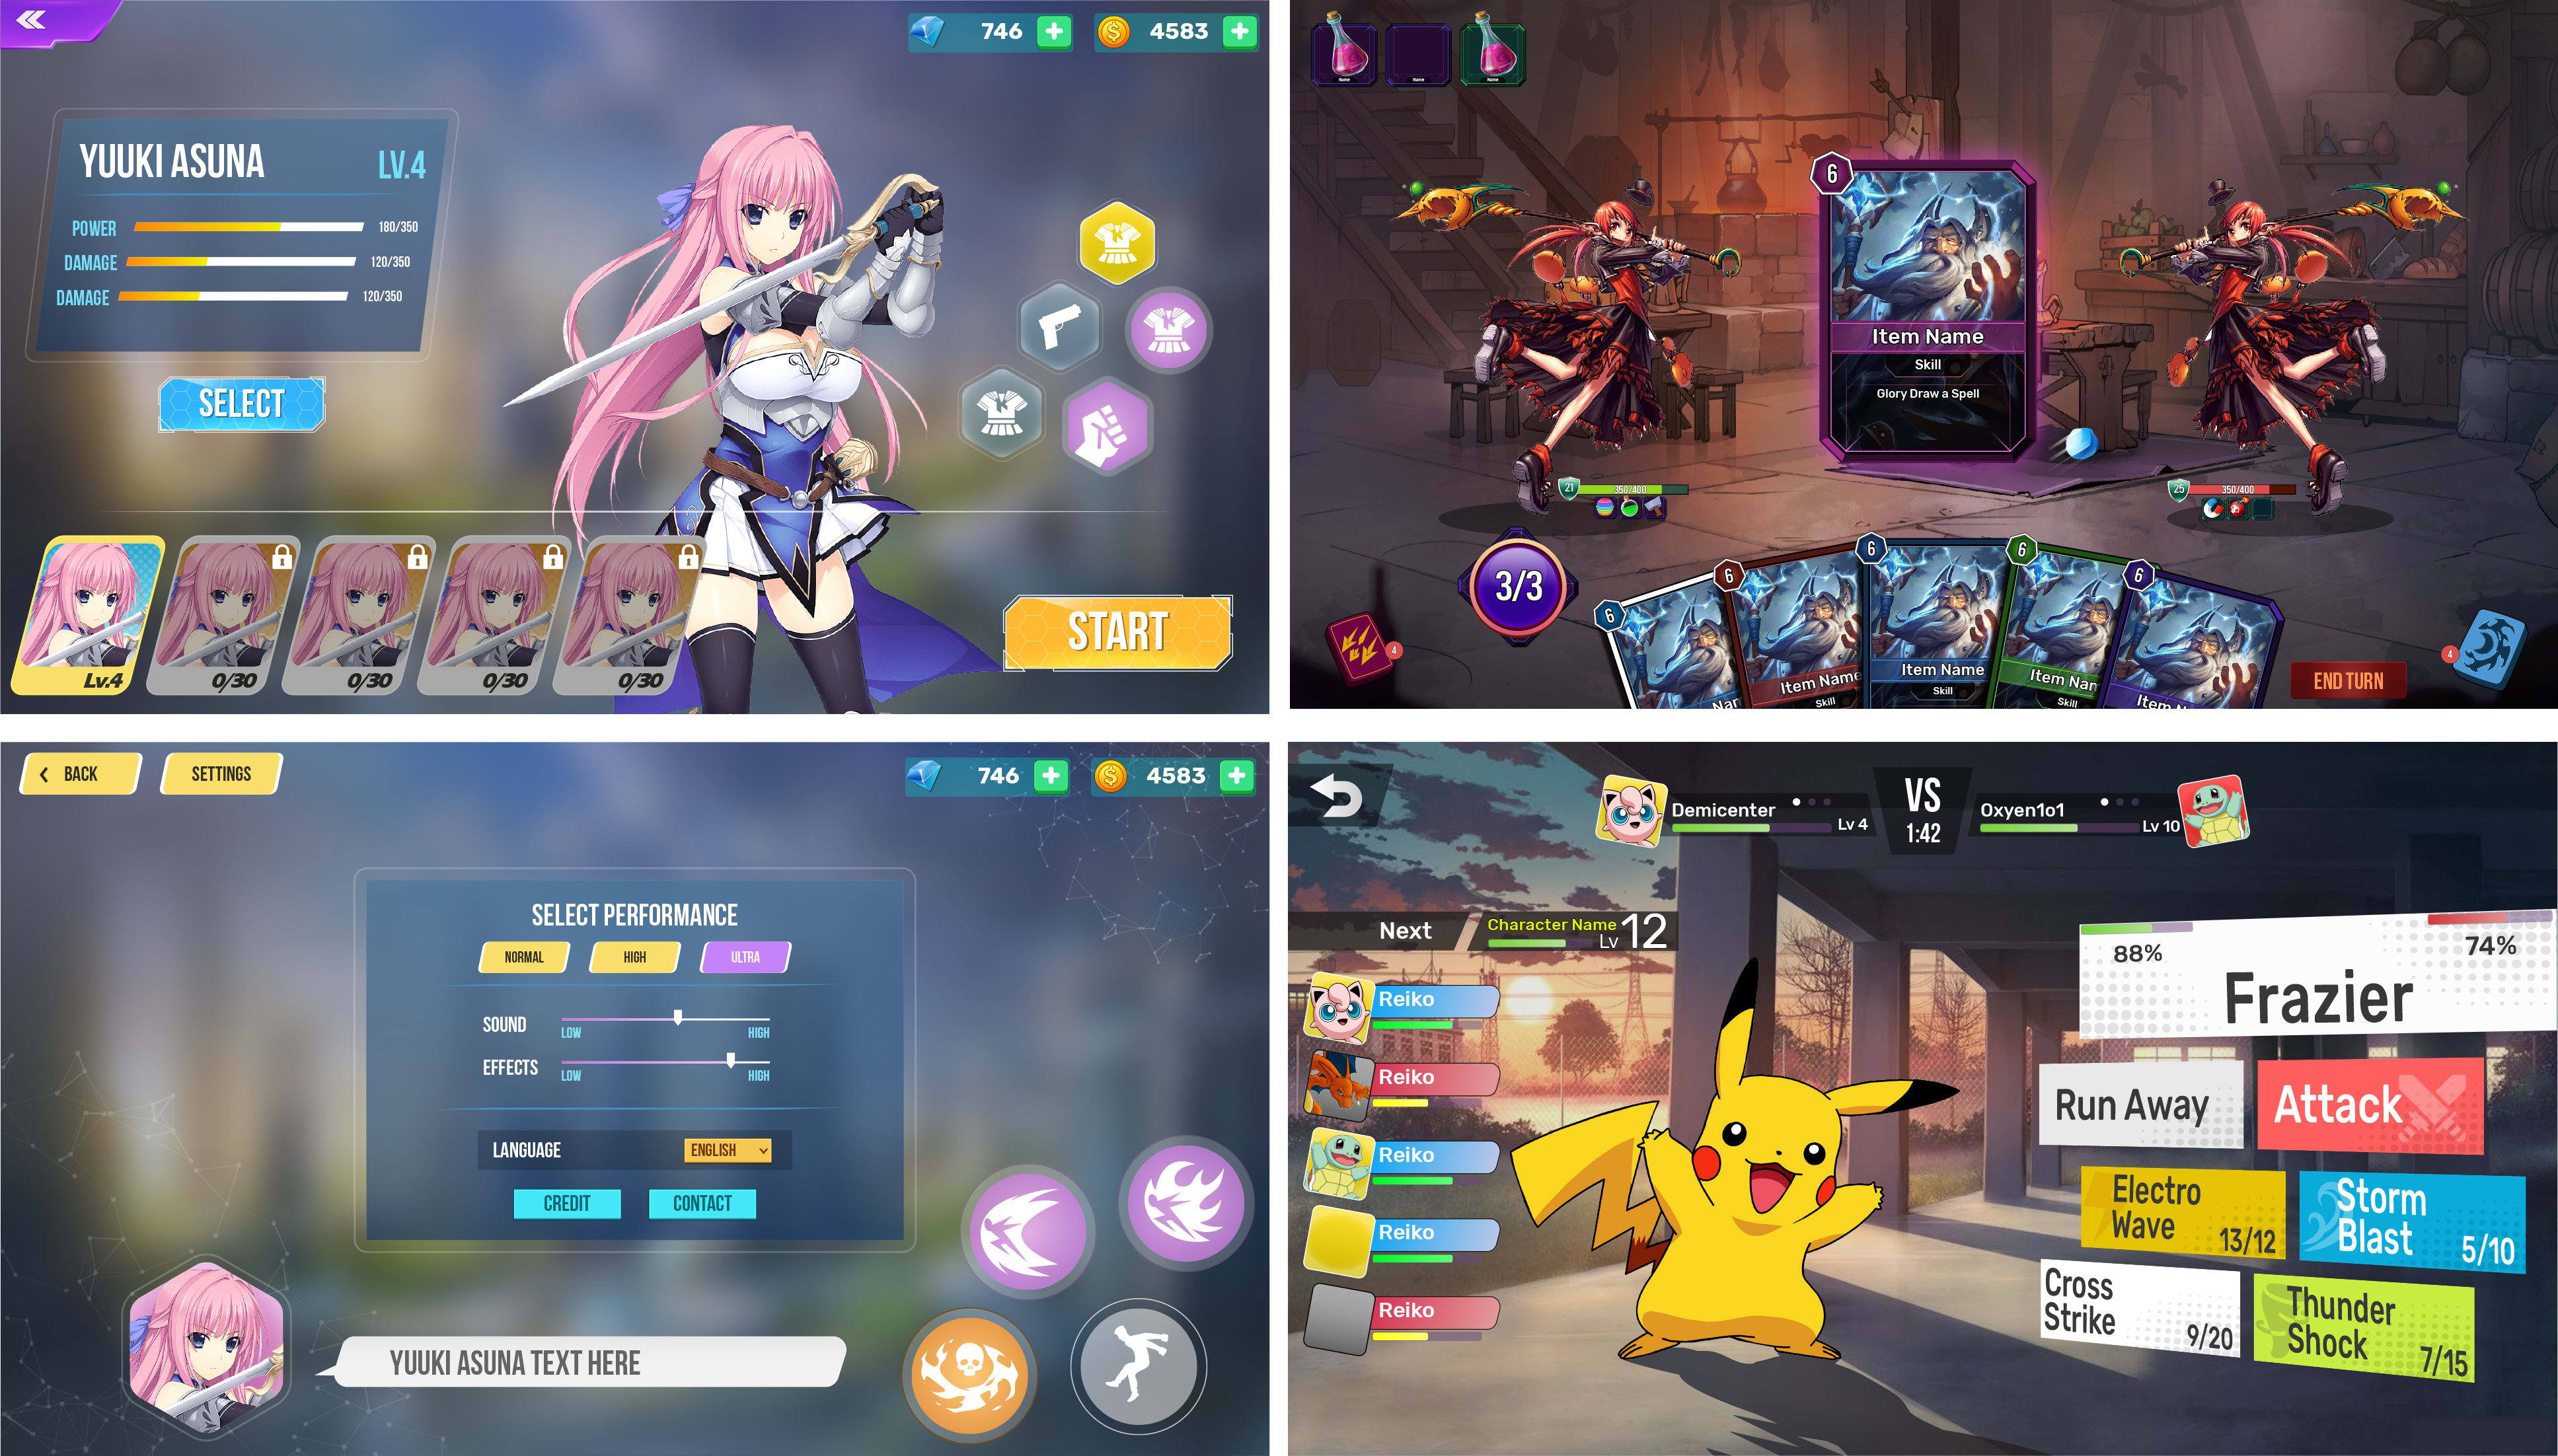 Design stylized anime game ui for your mobile and pc by Farhanali97 | Fiverr